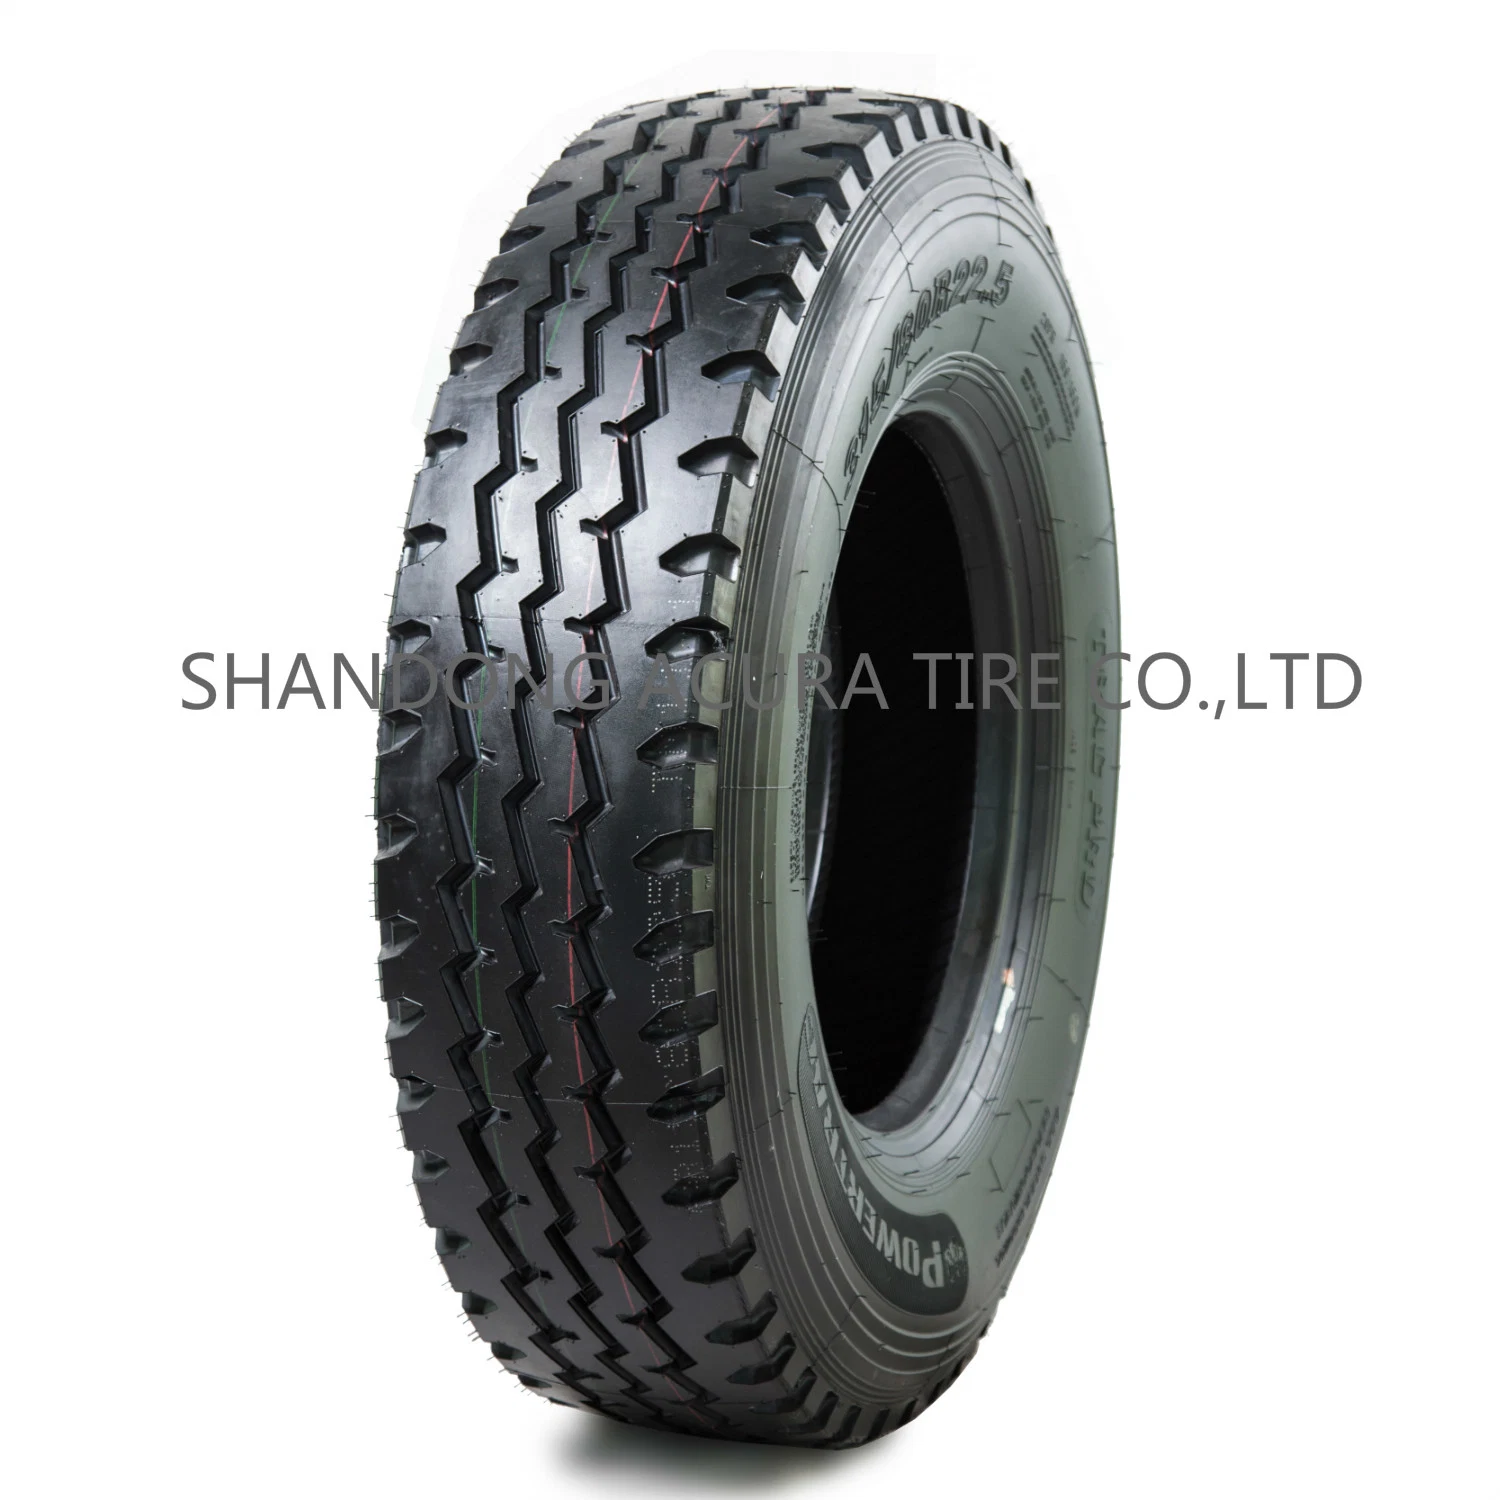 Truck Tyre for Highway, Chinese Top Brand Radial Truck Tyre DOT Smartway Truck Bus Tire (215/70r22.5 11r22.5 295/80r22.5)